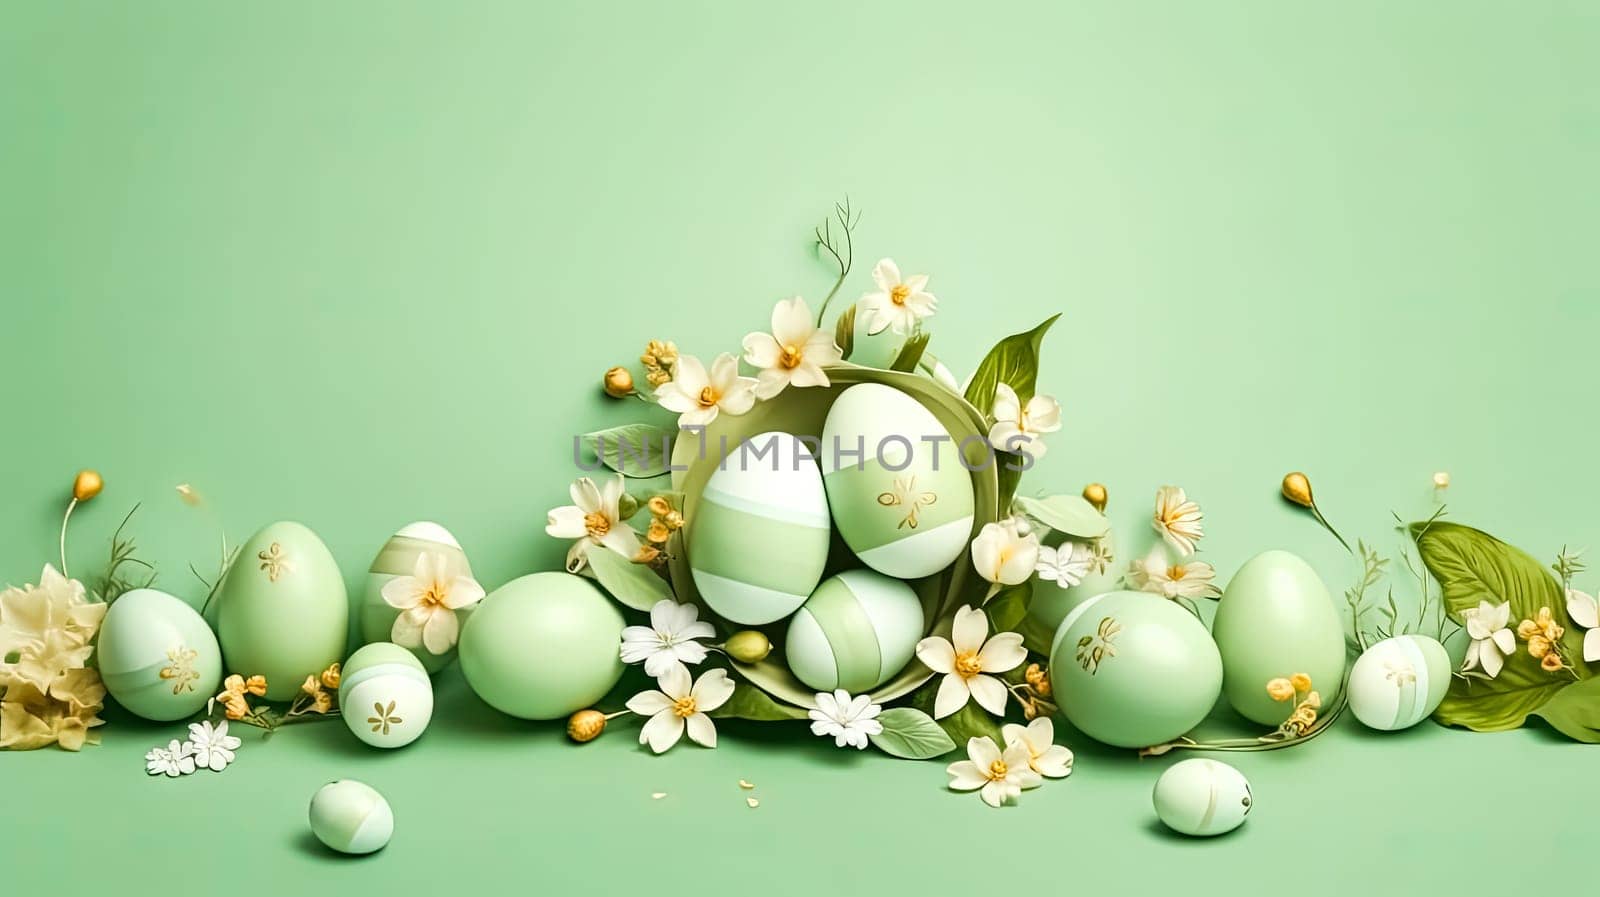 Springtime delight, Basket filled with Easter eggs a cheerful illustration radiating the joy of celebration during this vibrant spring holiday